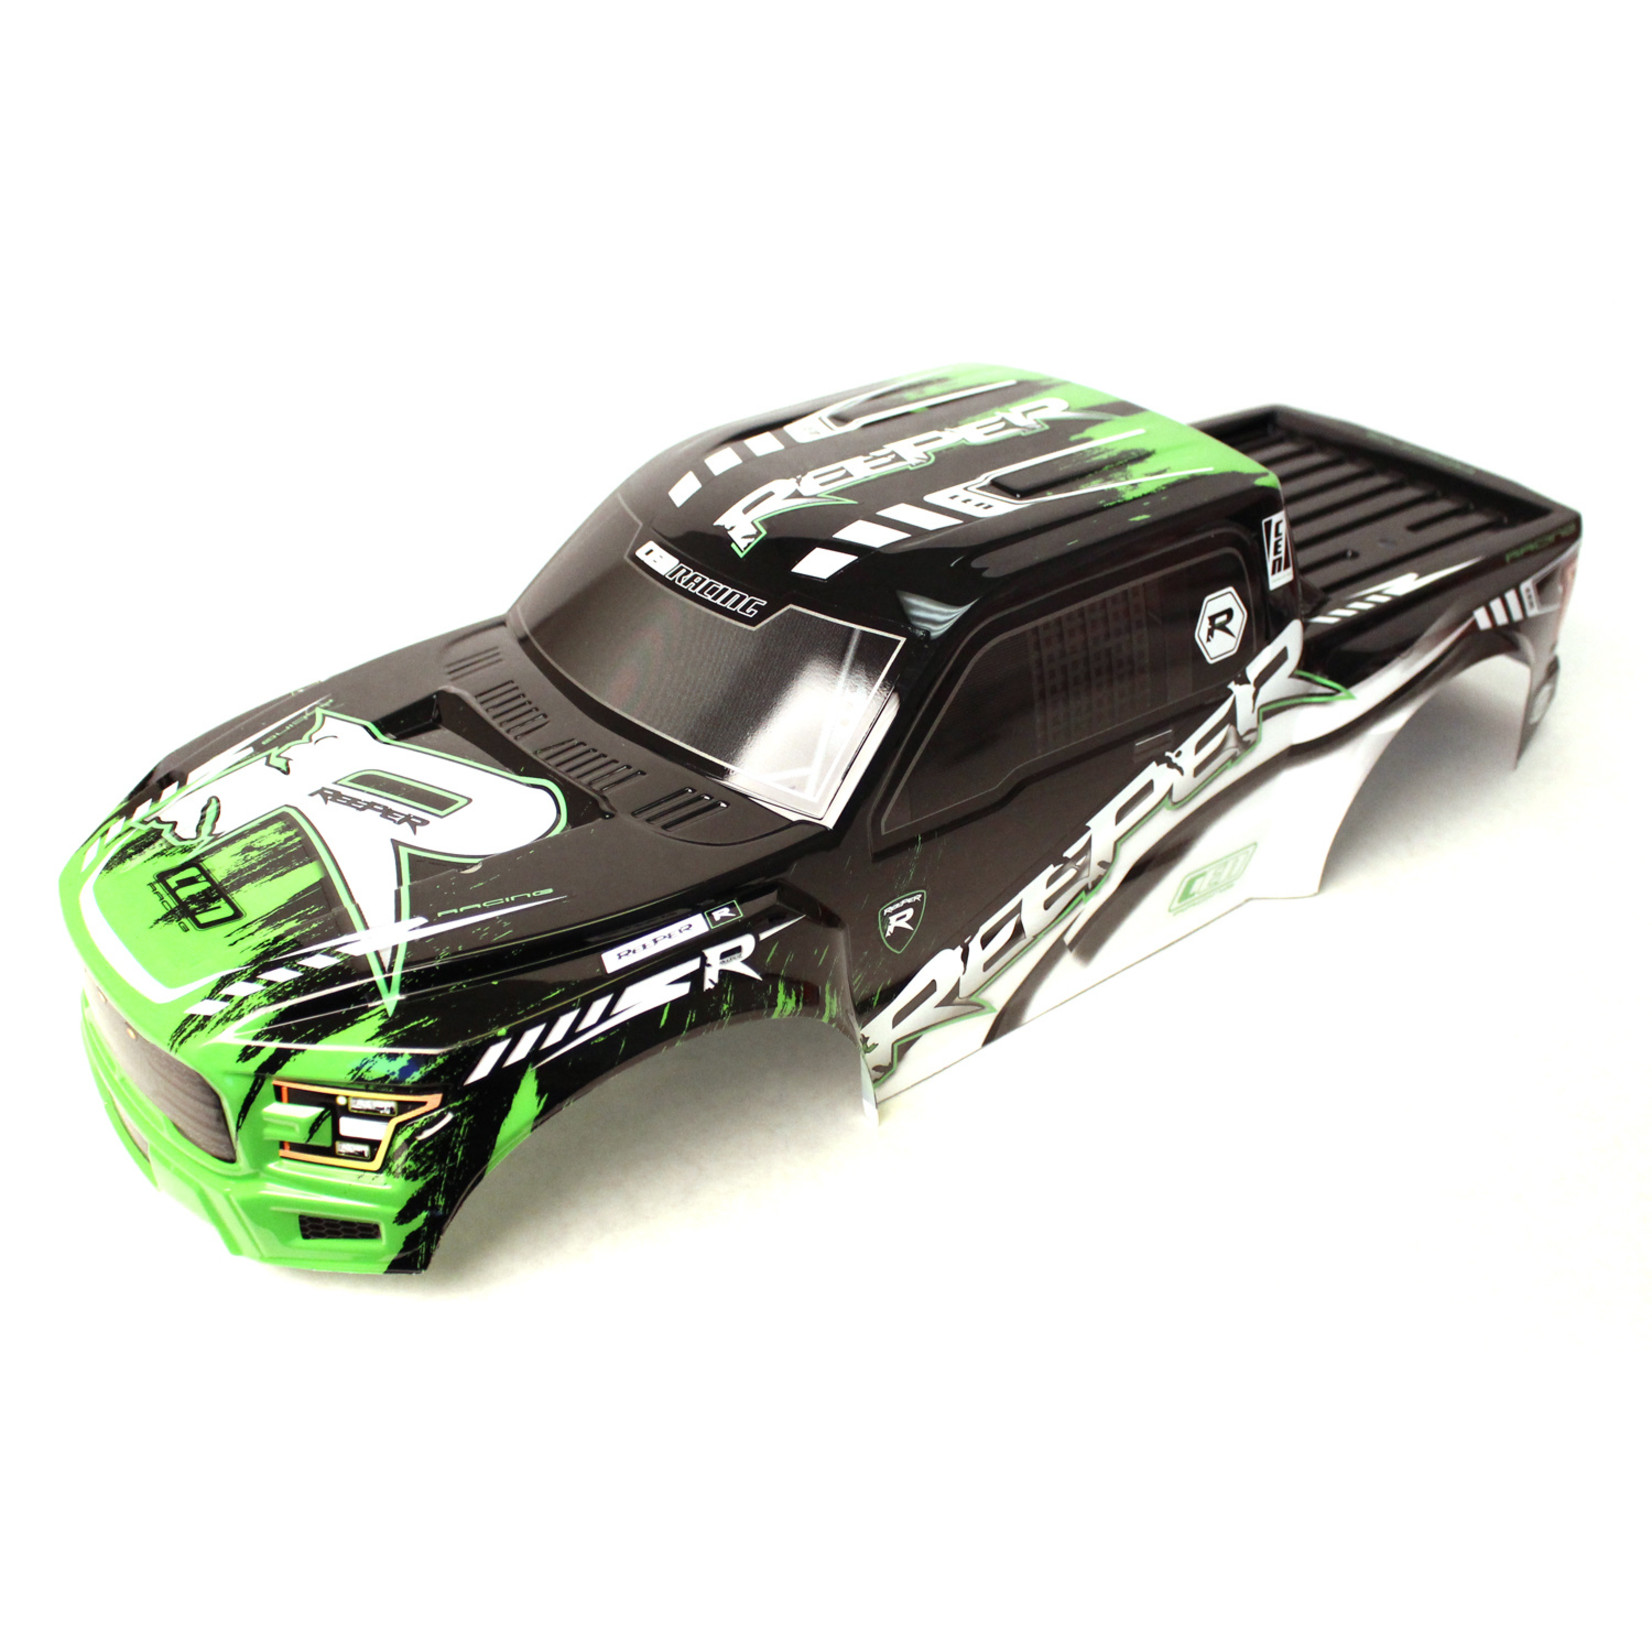 CEN Racing Reeper Truck Body (Green) Painted, for Colossus XT